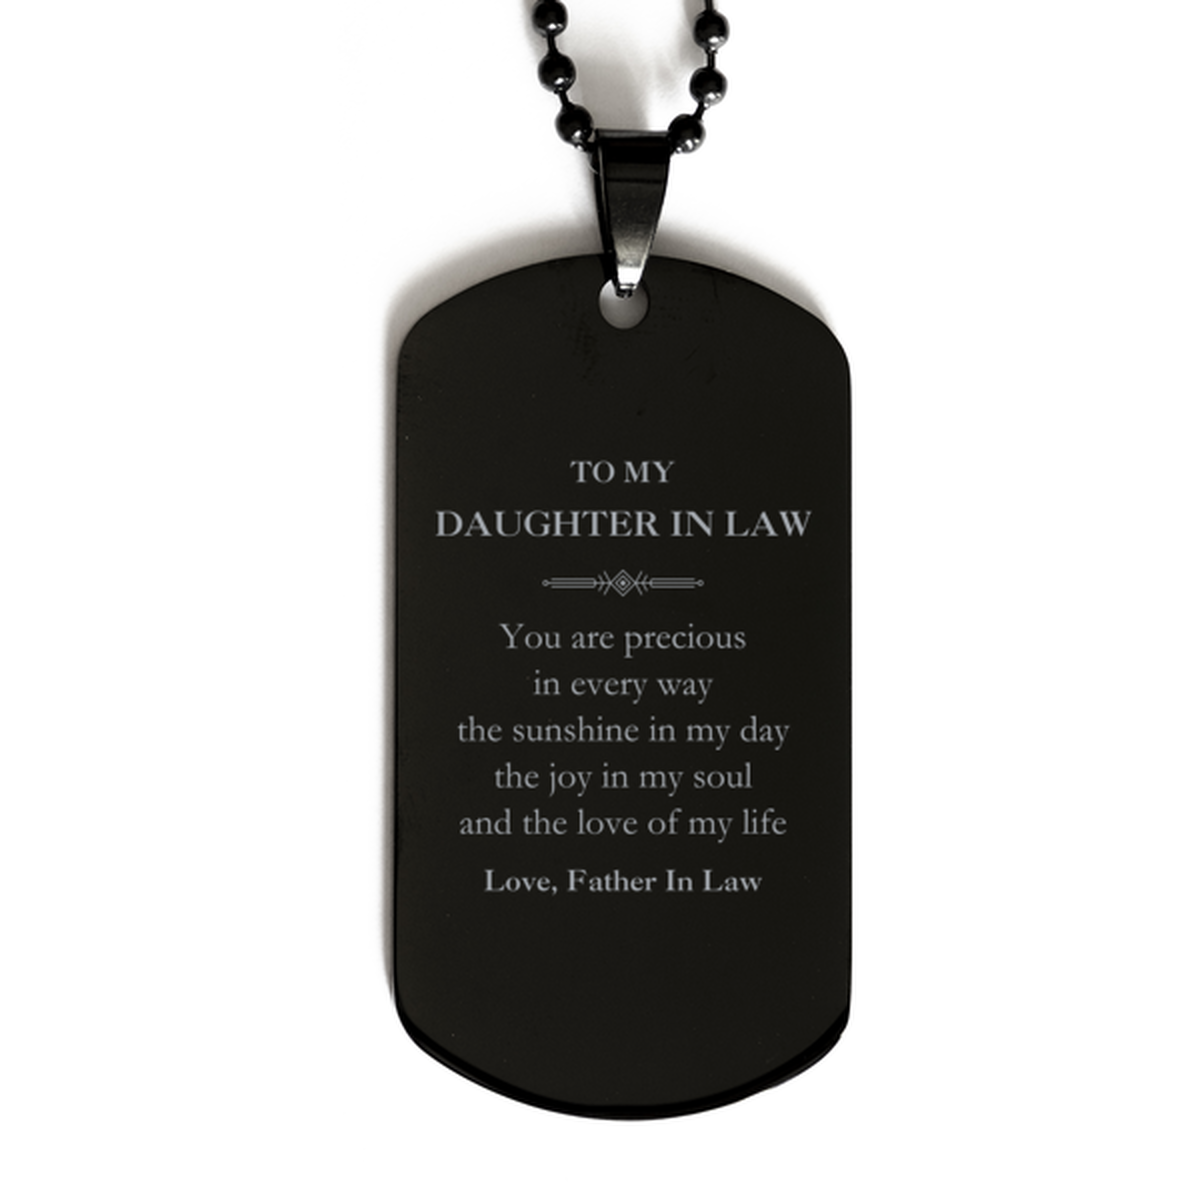 Graduation Gifts for Daughter In Law Black Dog Tag Present from Father In Law, Christmas Daughter In Law Birthday Gifts Daughter In Law You are precious in every way the sunshine in my day. Love, Father In Law